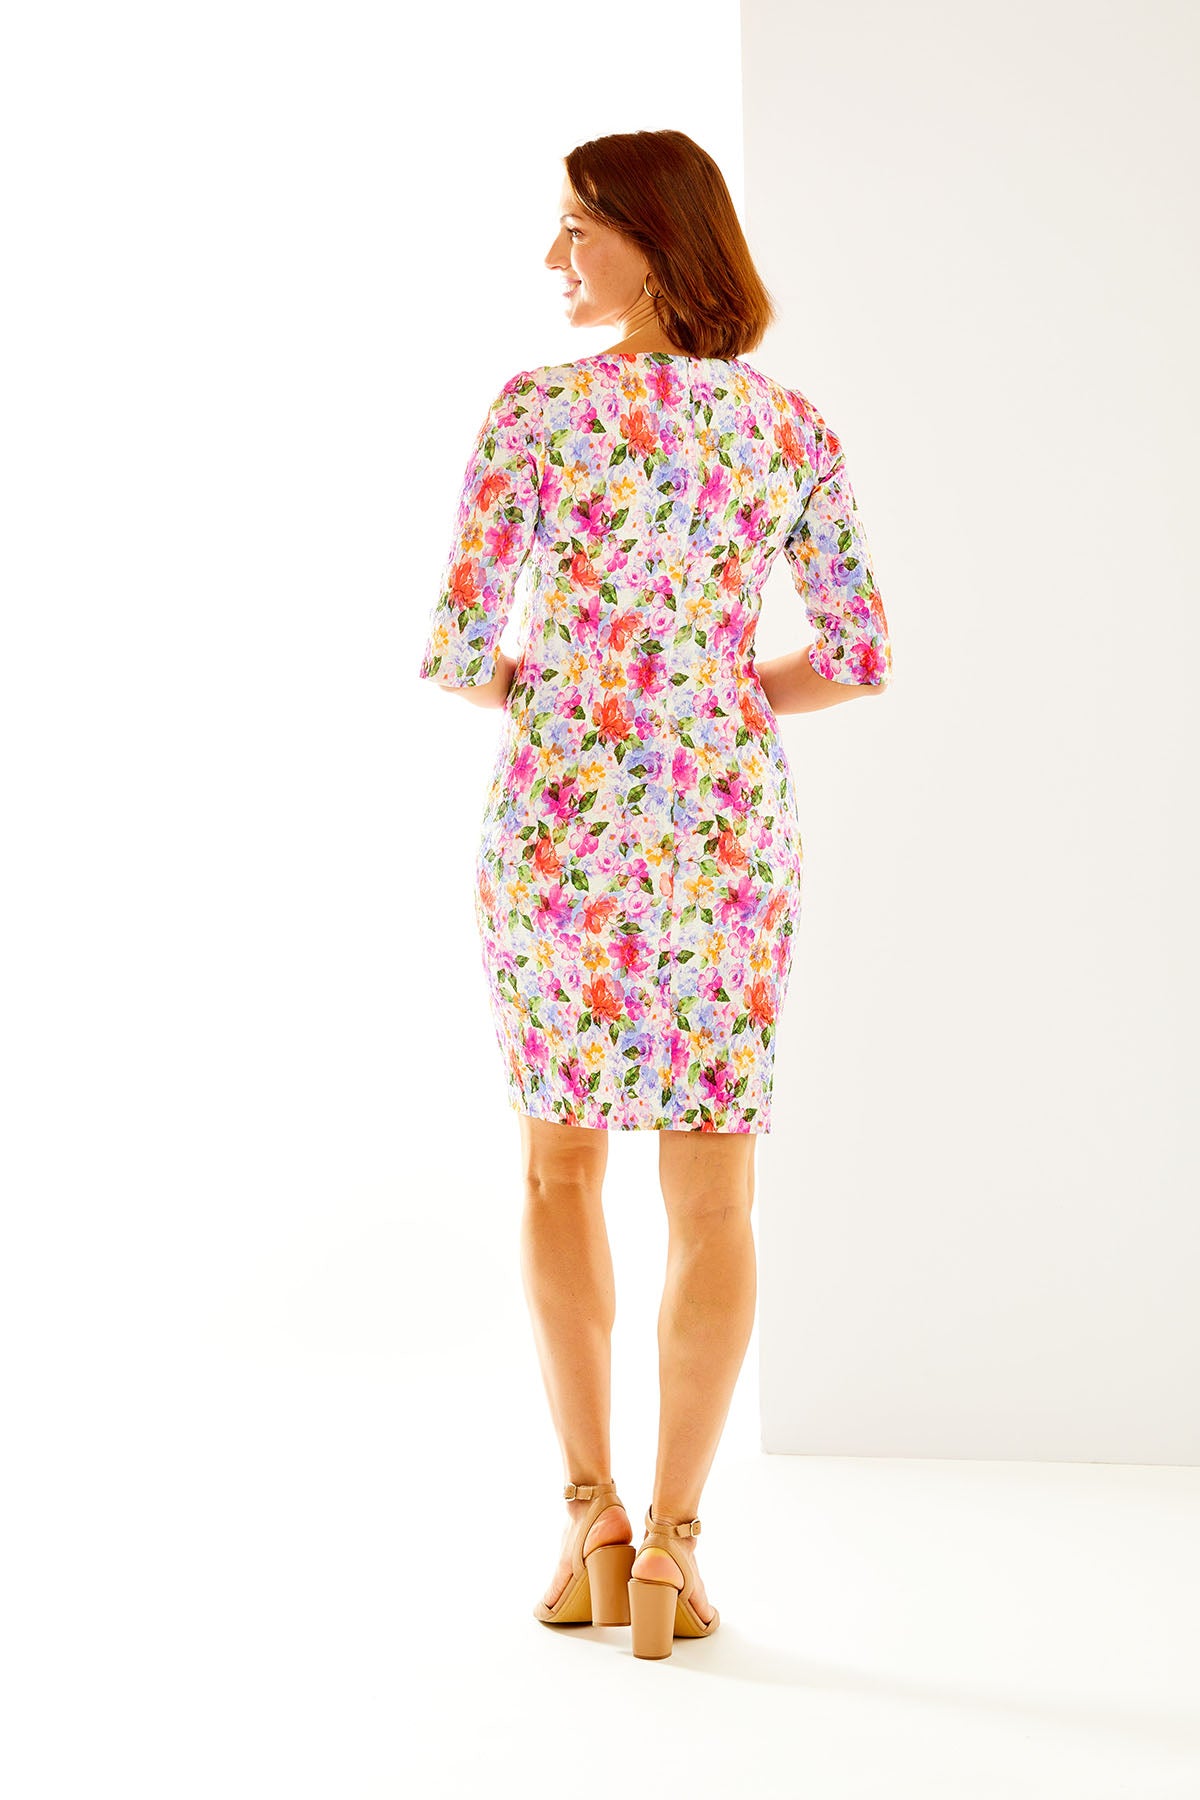 Woman in multi-colored floral dress